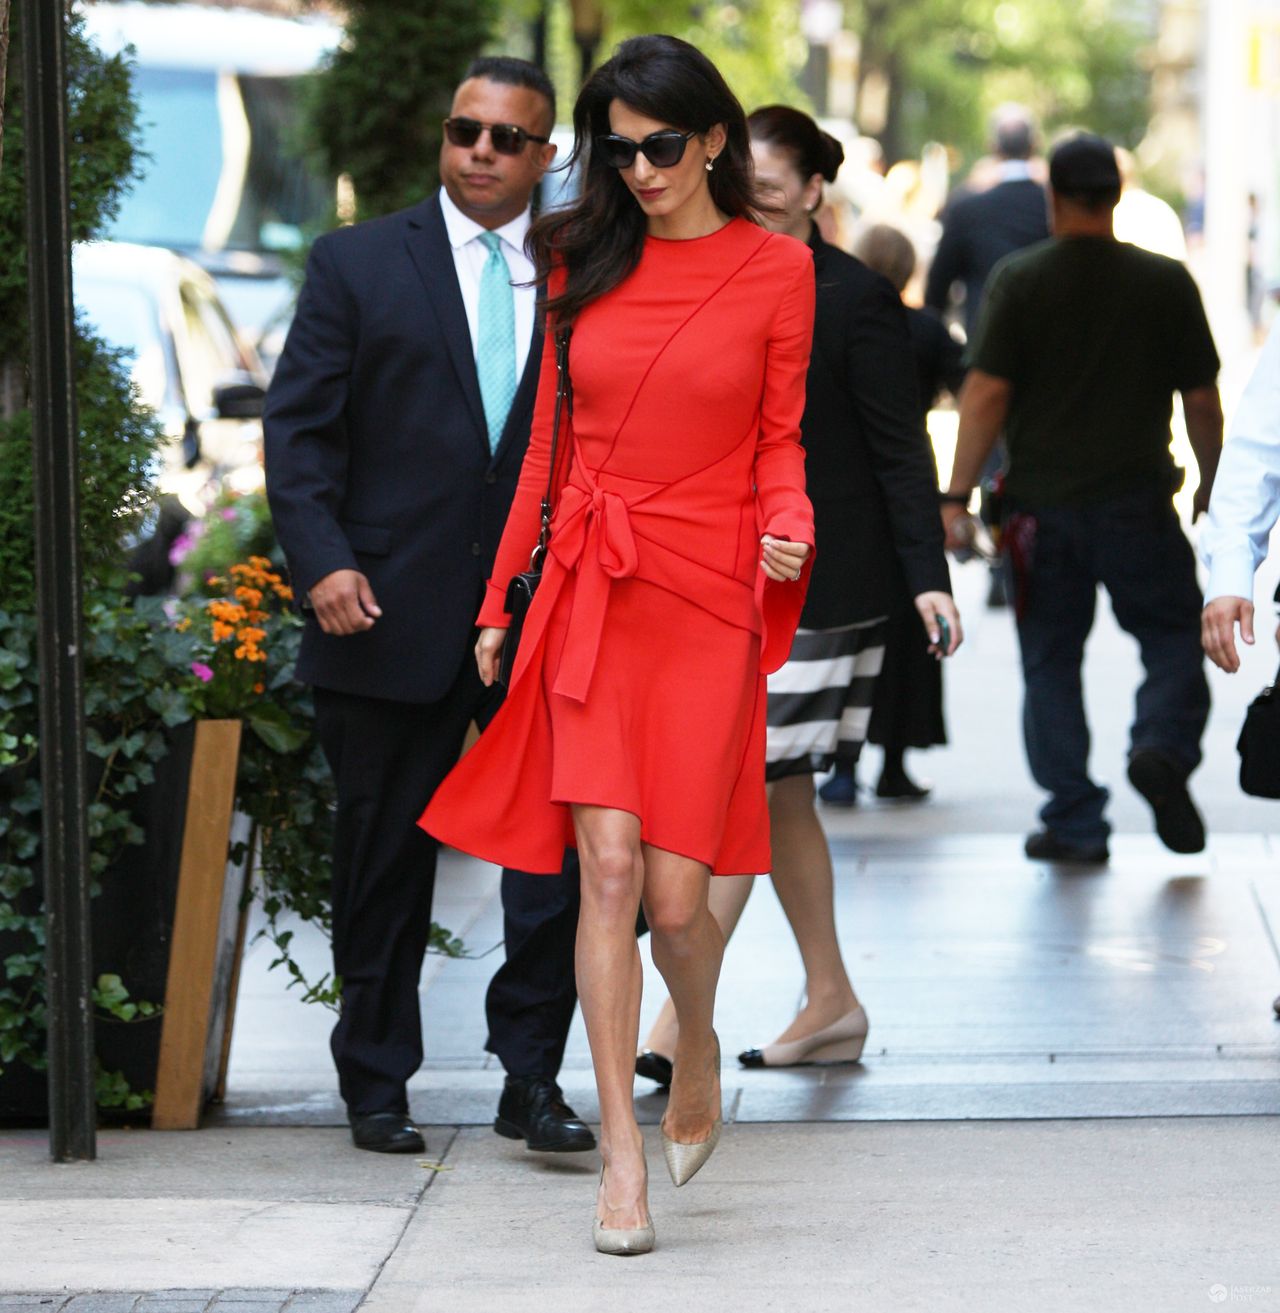 157462, Amal Clooney seen out in red on her way to the United Nations Uptown in NYC. New York, New York - Thursday September 22, 2016. Photograph: © Brian Flannery, PacificCoastNews. Los Angeles Office (PCN): +1 310.822.0419 UK Office (Photoshot): +44 (0) 20 7421 6000